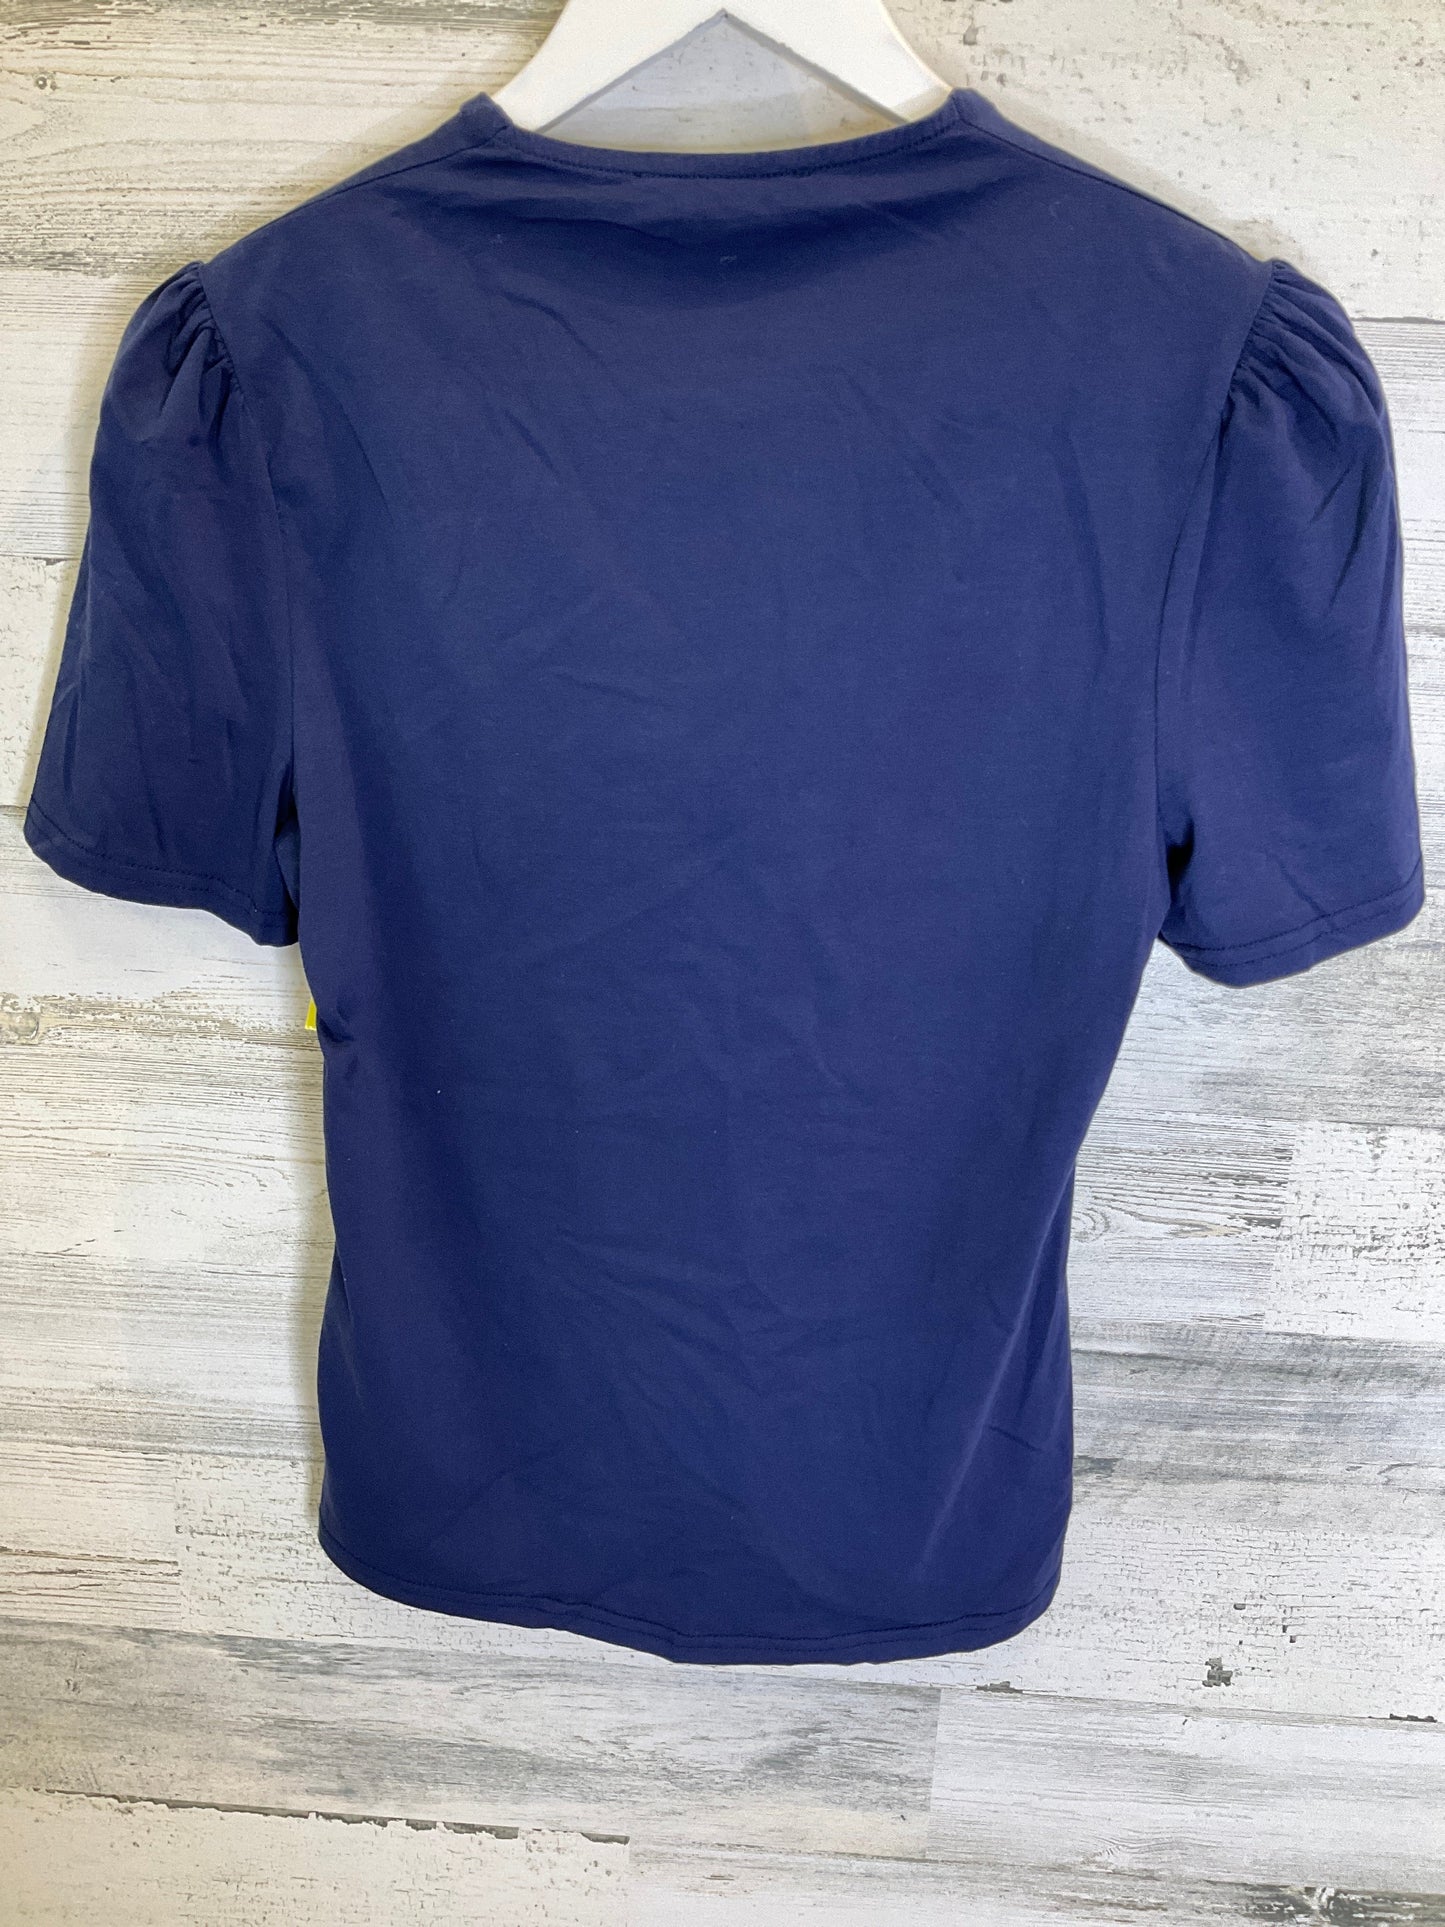 Navy Top Short Sleeve Clothes Mentor, Size M